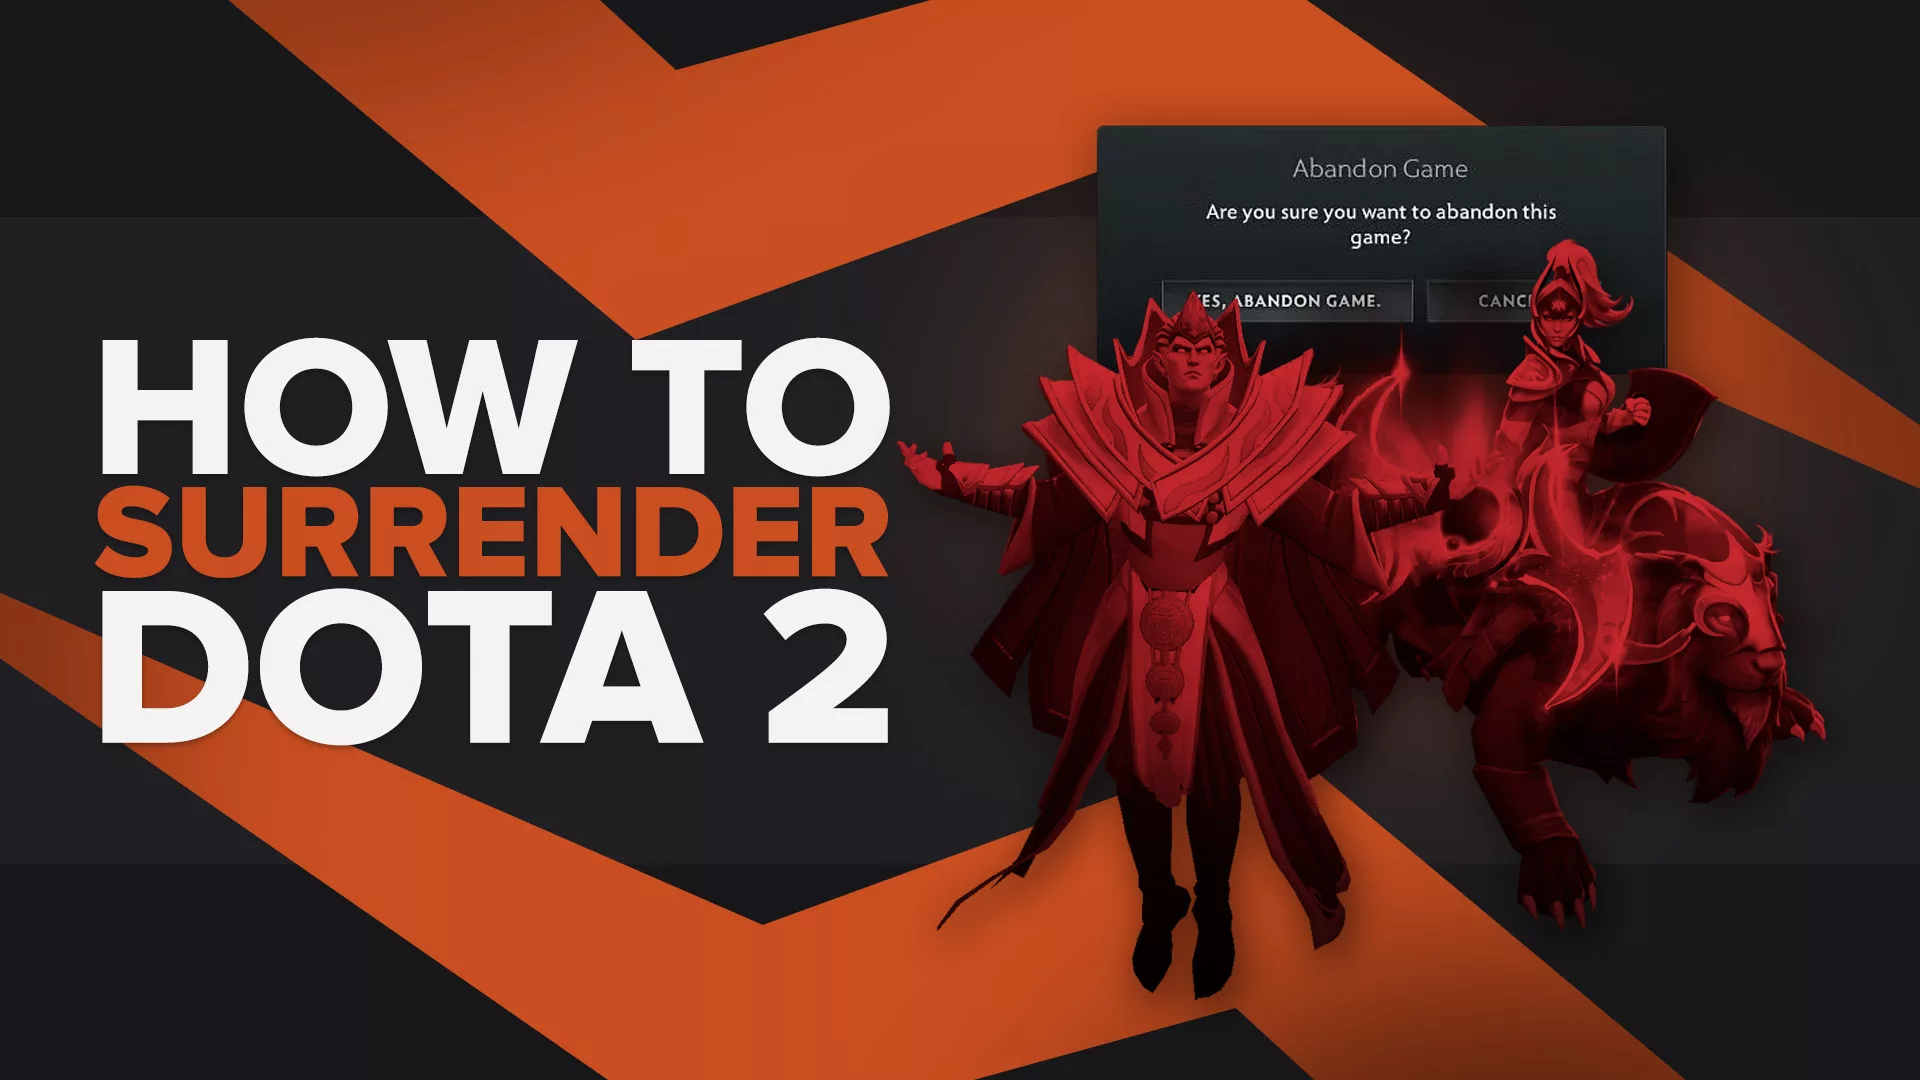 How To Surrender in Dota 2 (But There's A Catch, So Read this Before)